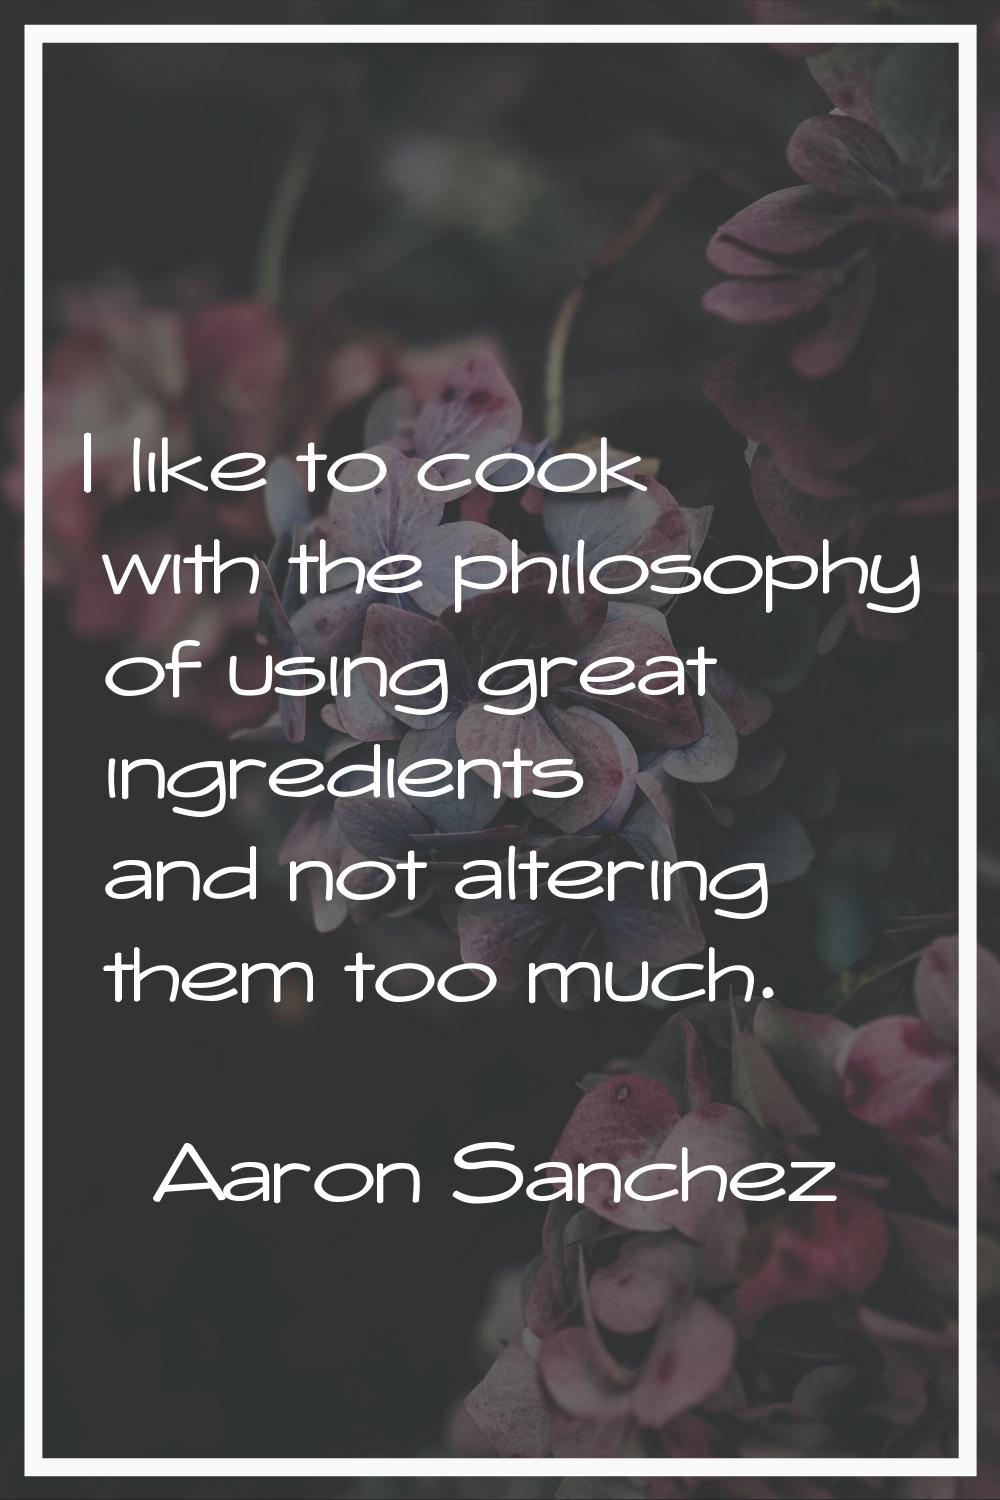 I like to cook with the philosophy of using great ingredients and not altering them too much.